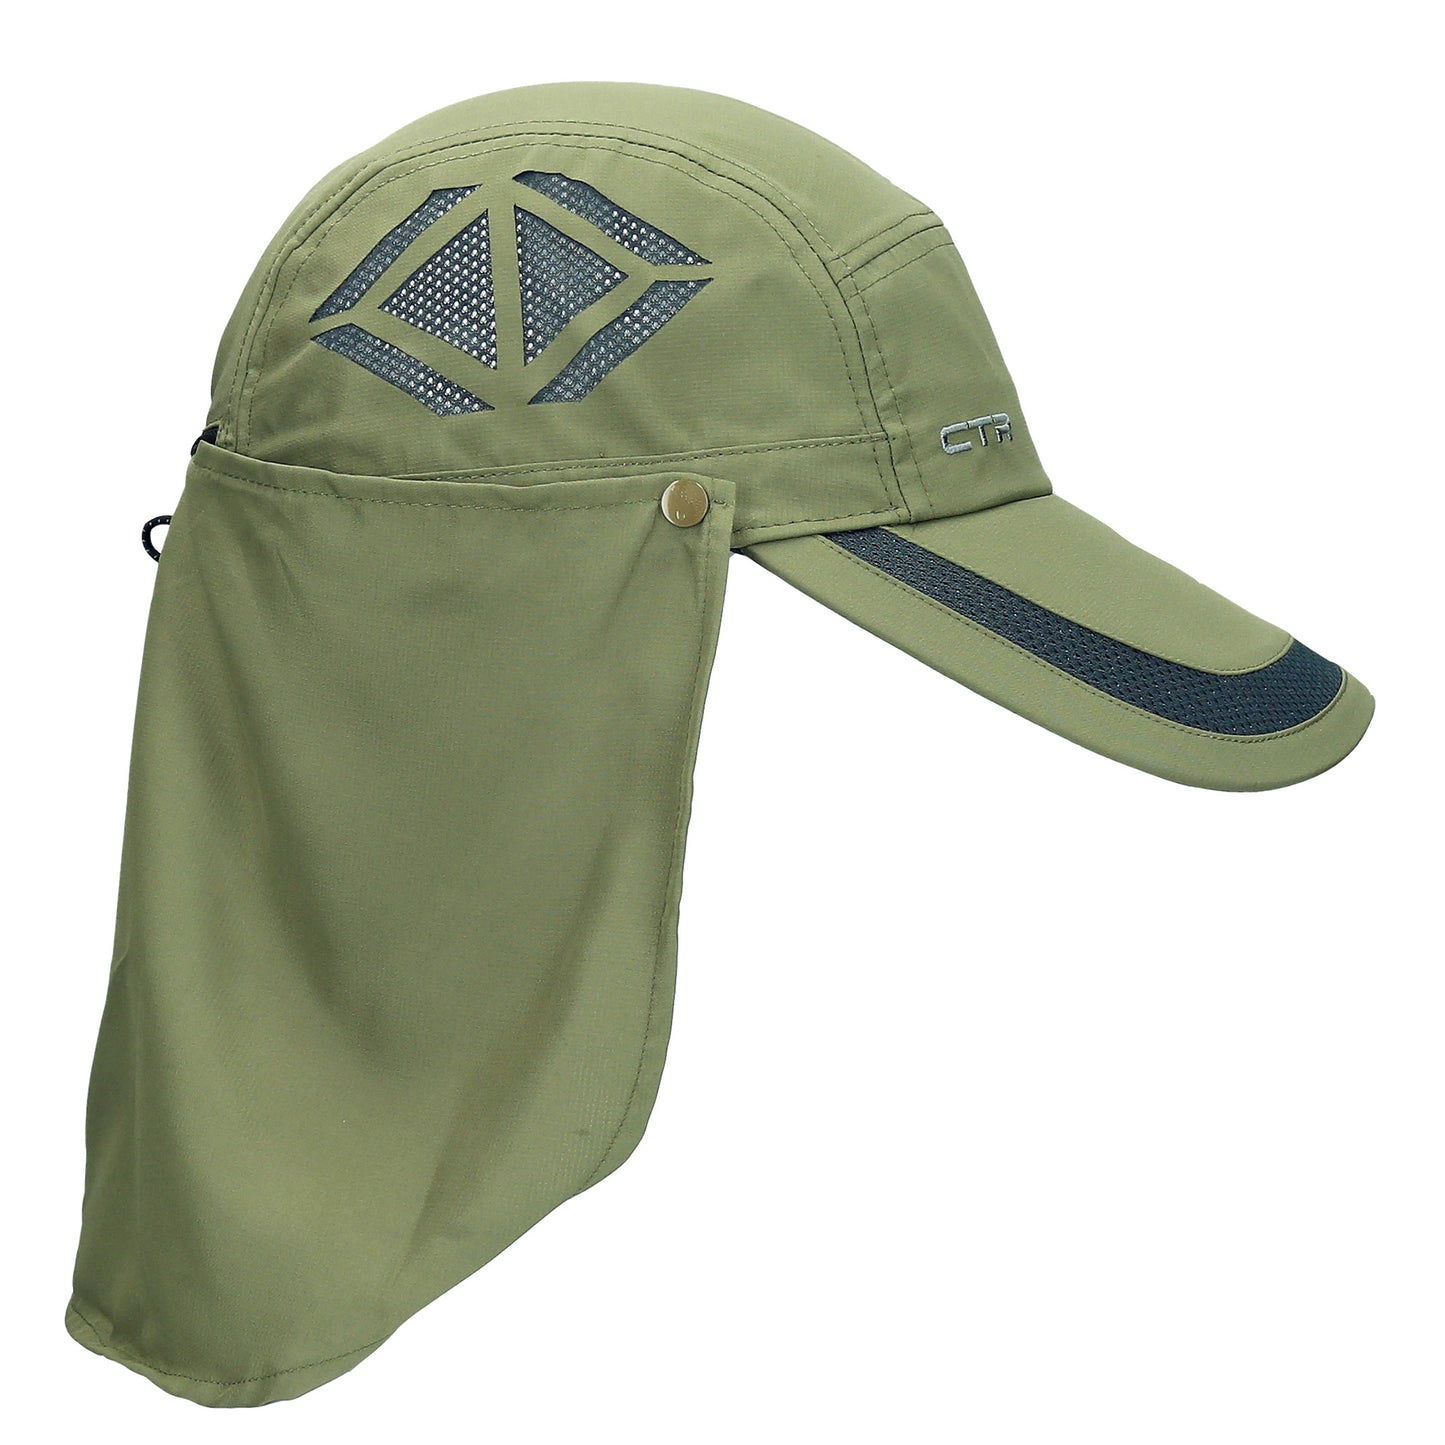 Nomad Sail Cap  CTR Style:1364